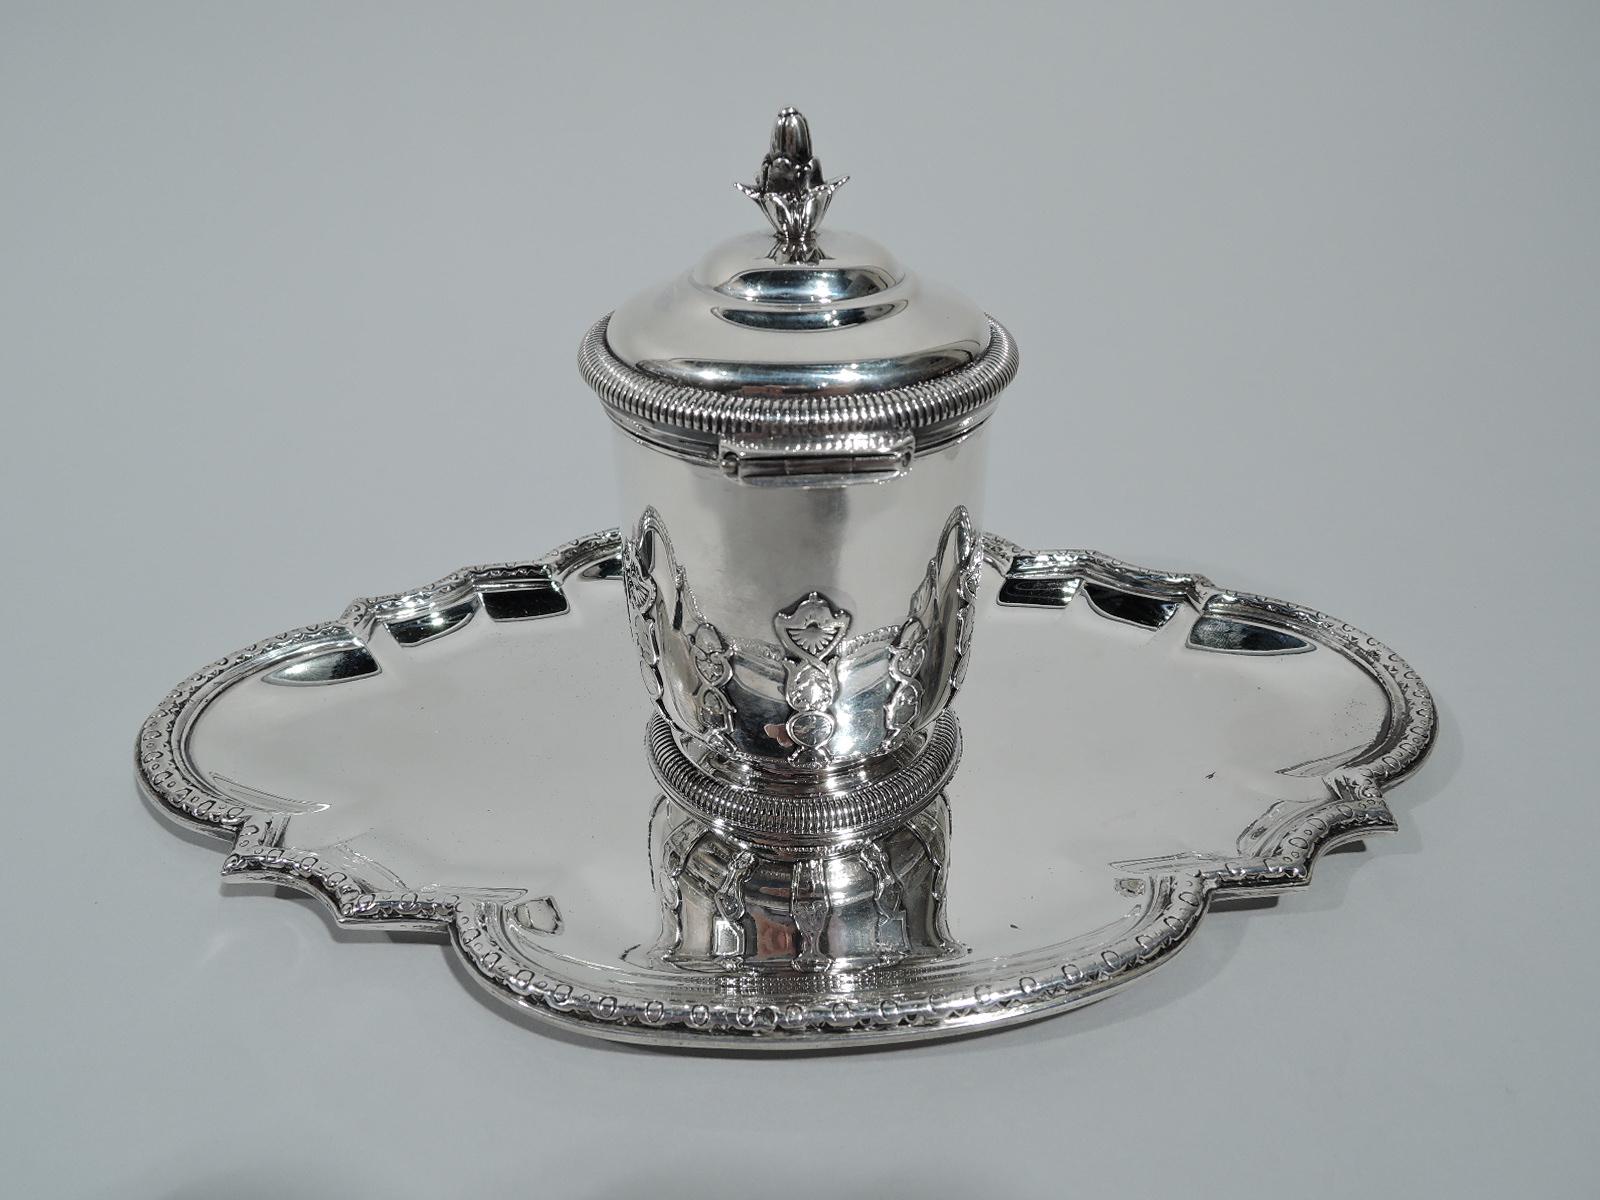 French 950 silver inkwell on stand, circa 1910. Straight sides with vertically applied strapwork bands; curved bottom and raised foot. Cover hinged and domed with flower-head finial. Gadrooned rims. Interior has engraved curvilinear border and